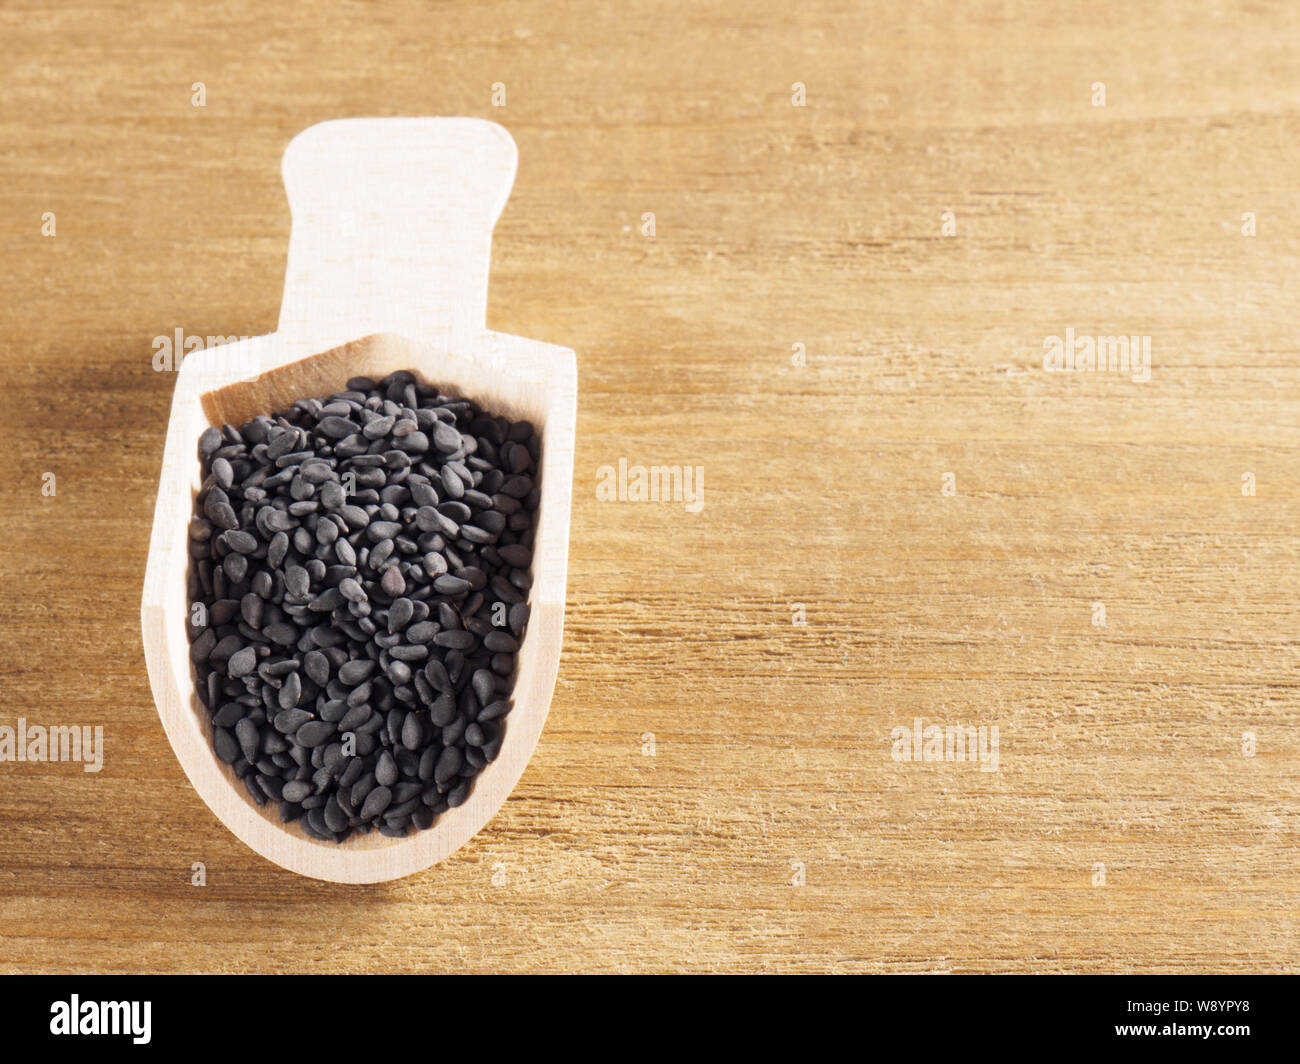 Black sesame (Sesamum indicum) in a scoop on a wooden background Stock Photo